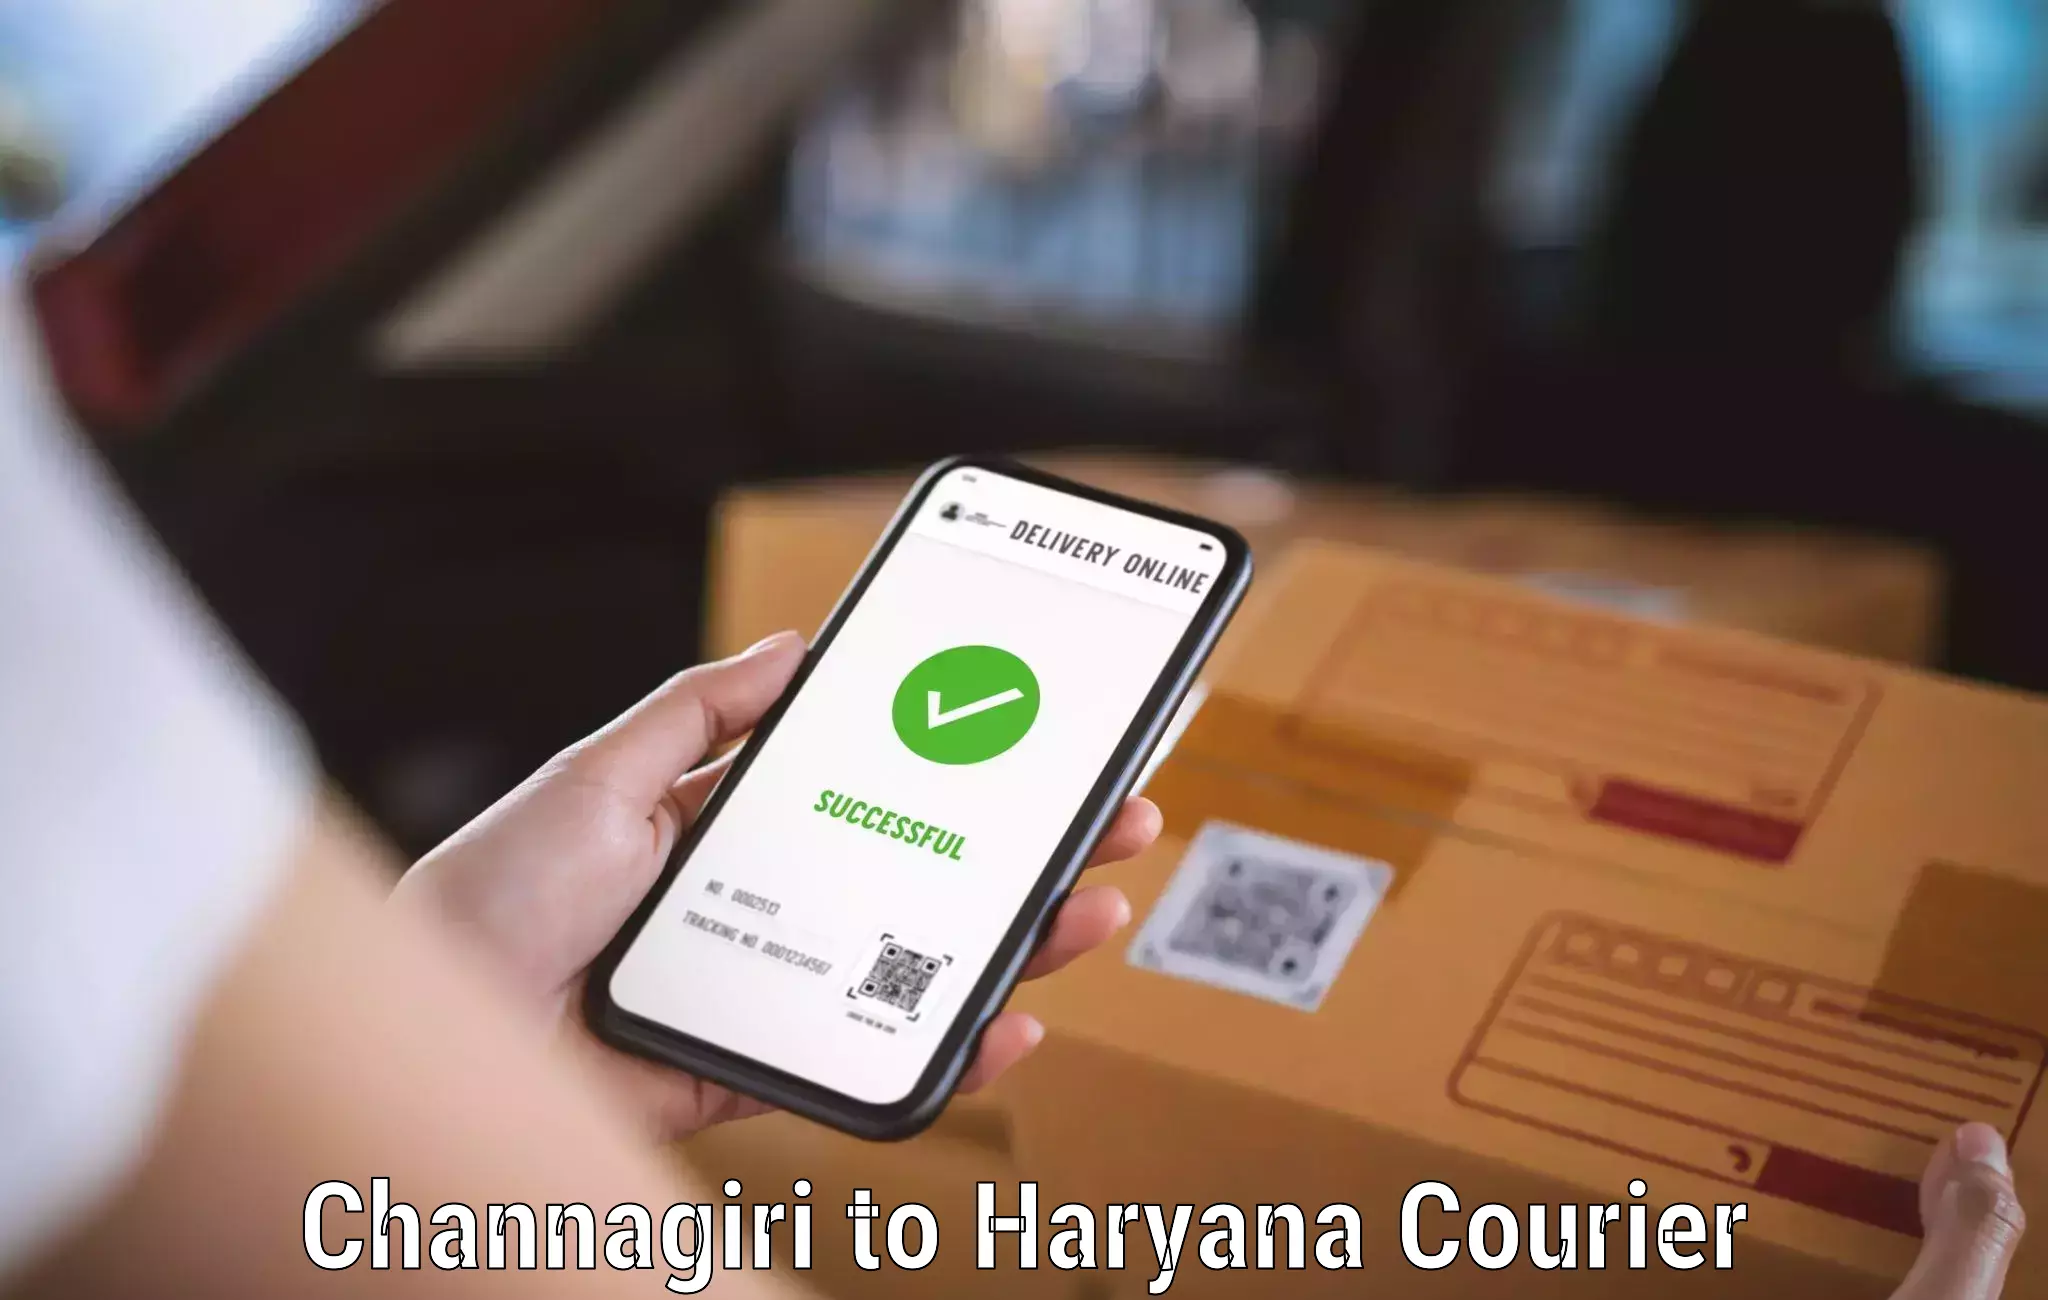 Large package courier Channagiri to Chaudhary Charan Singh Haryana Agricultural University Hisar